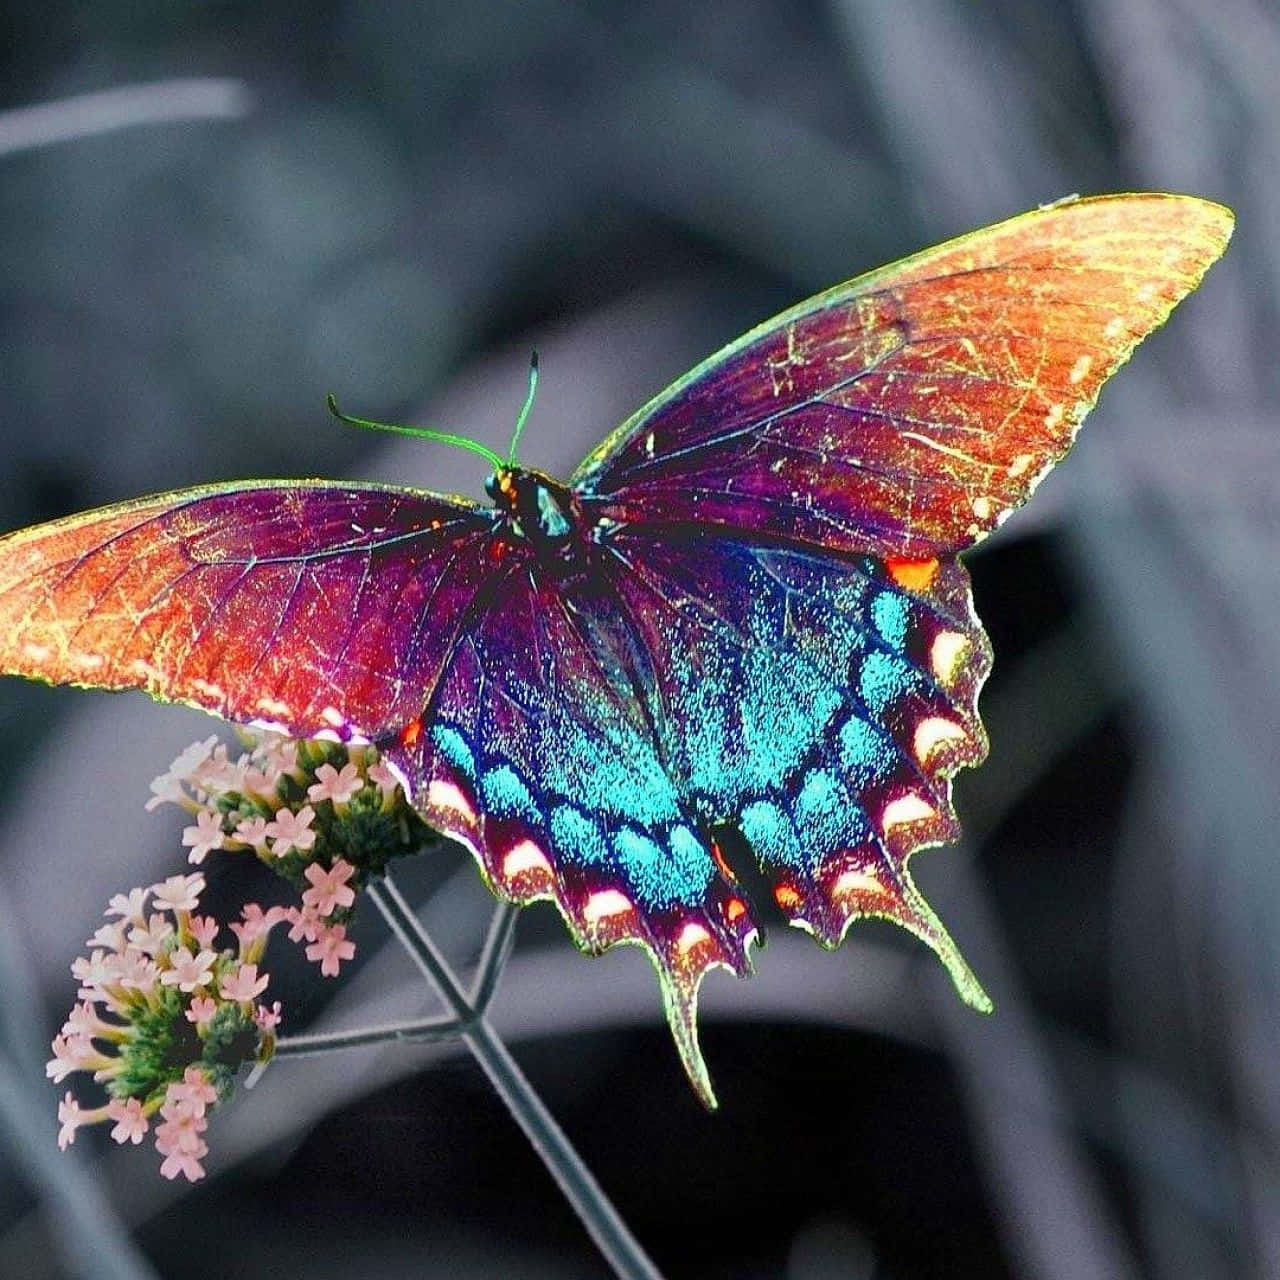 "A beautiful butterfly with vibrant colours".